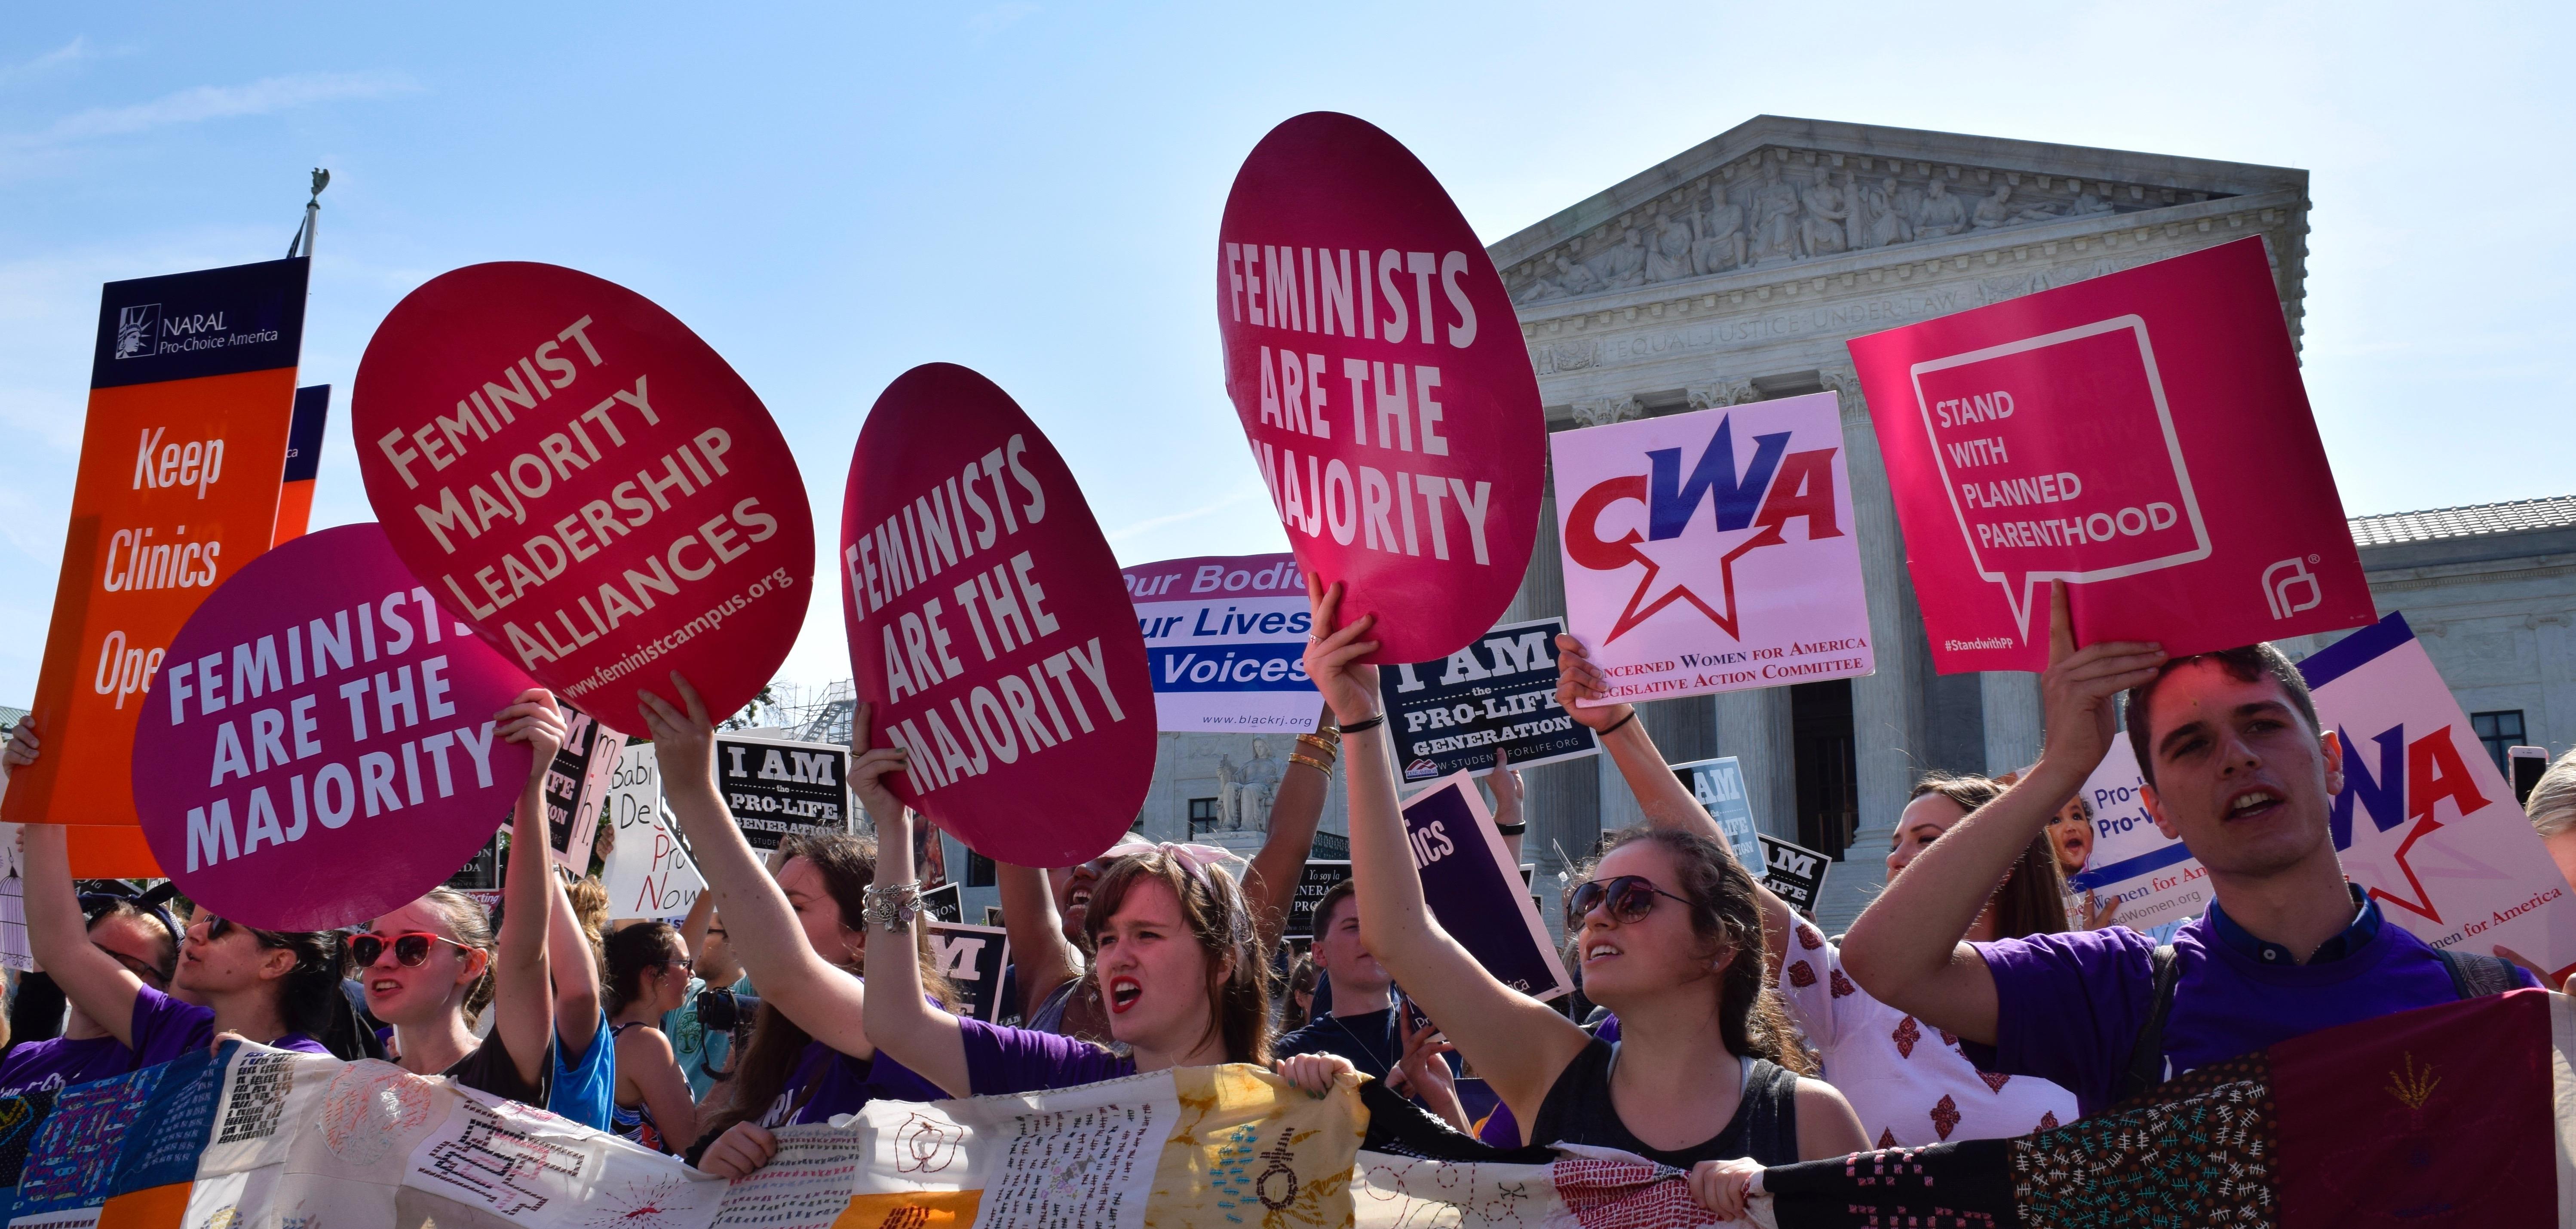 Women holding up signs that say "Feminist majority leadership alliances" in front of the Supreme Court